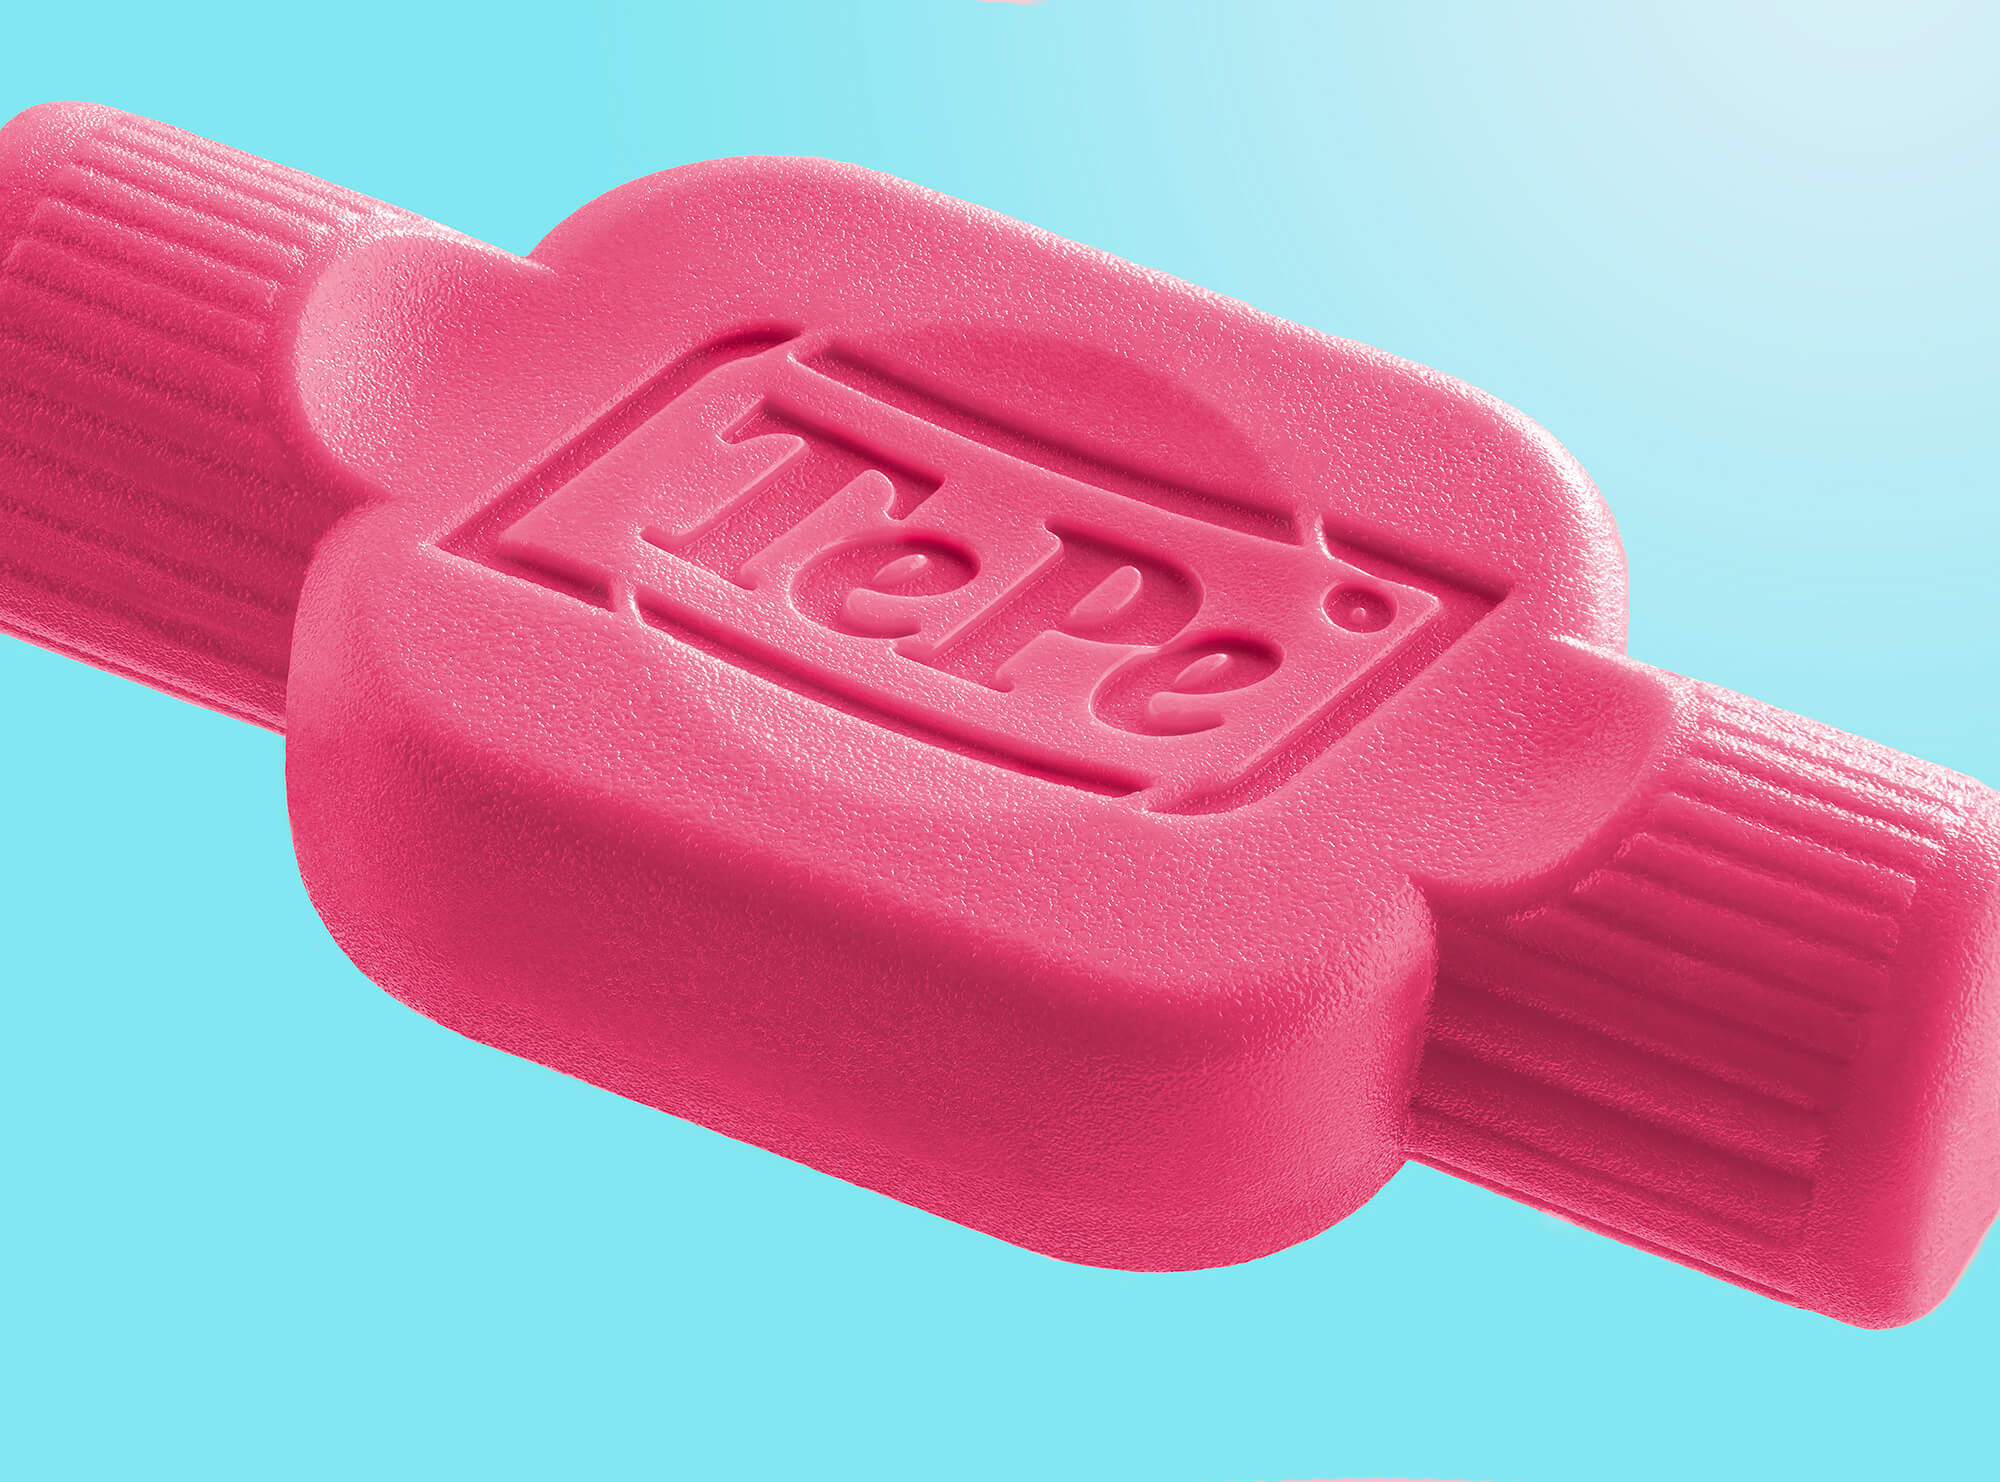 TePe close-up tooth brush. Pink product and colorful background.